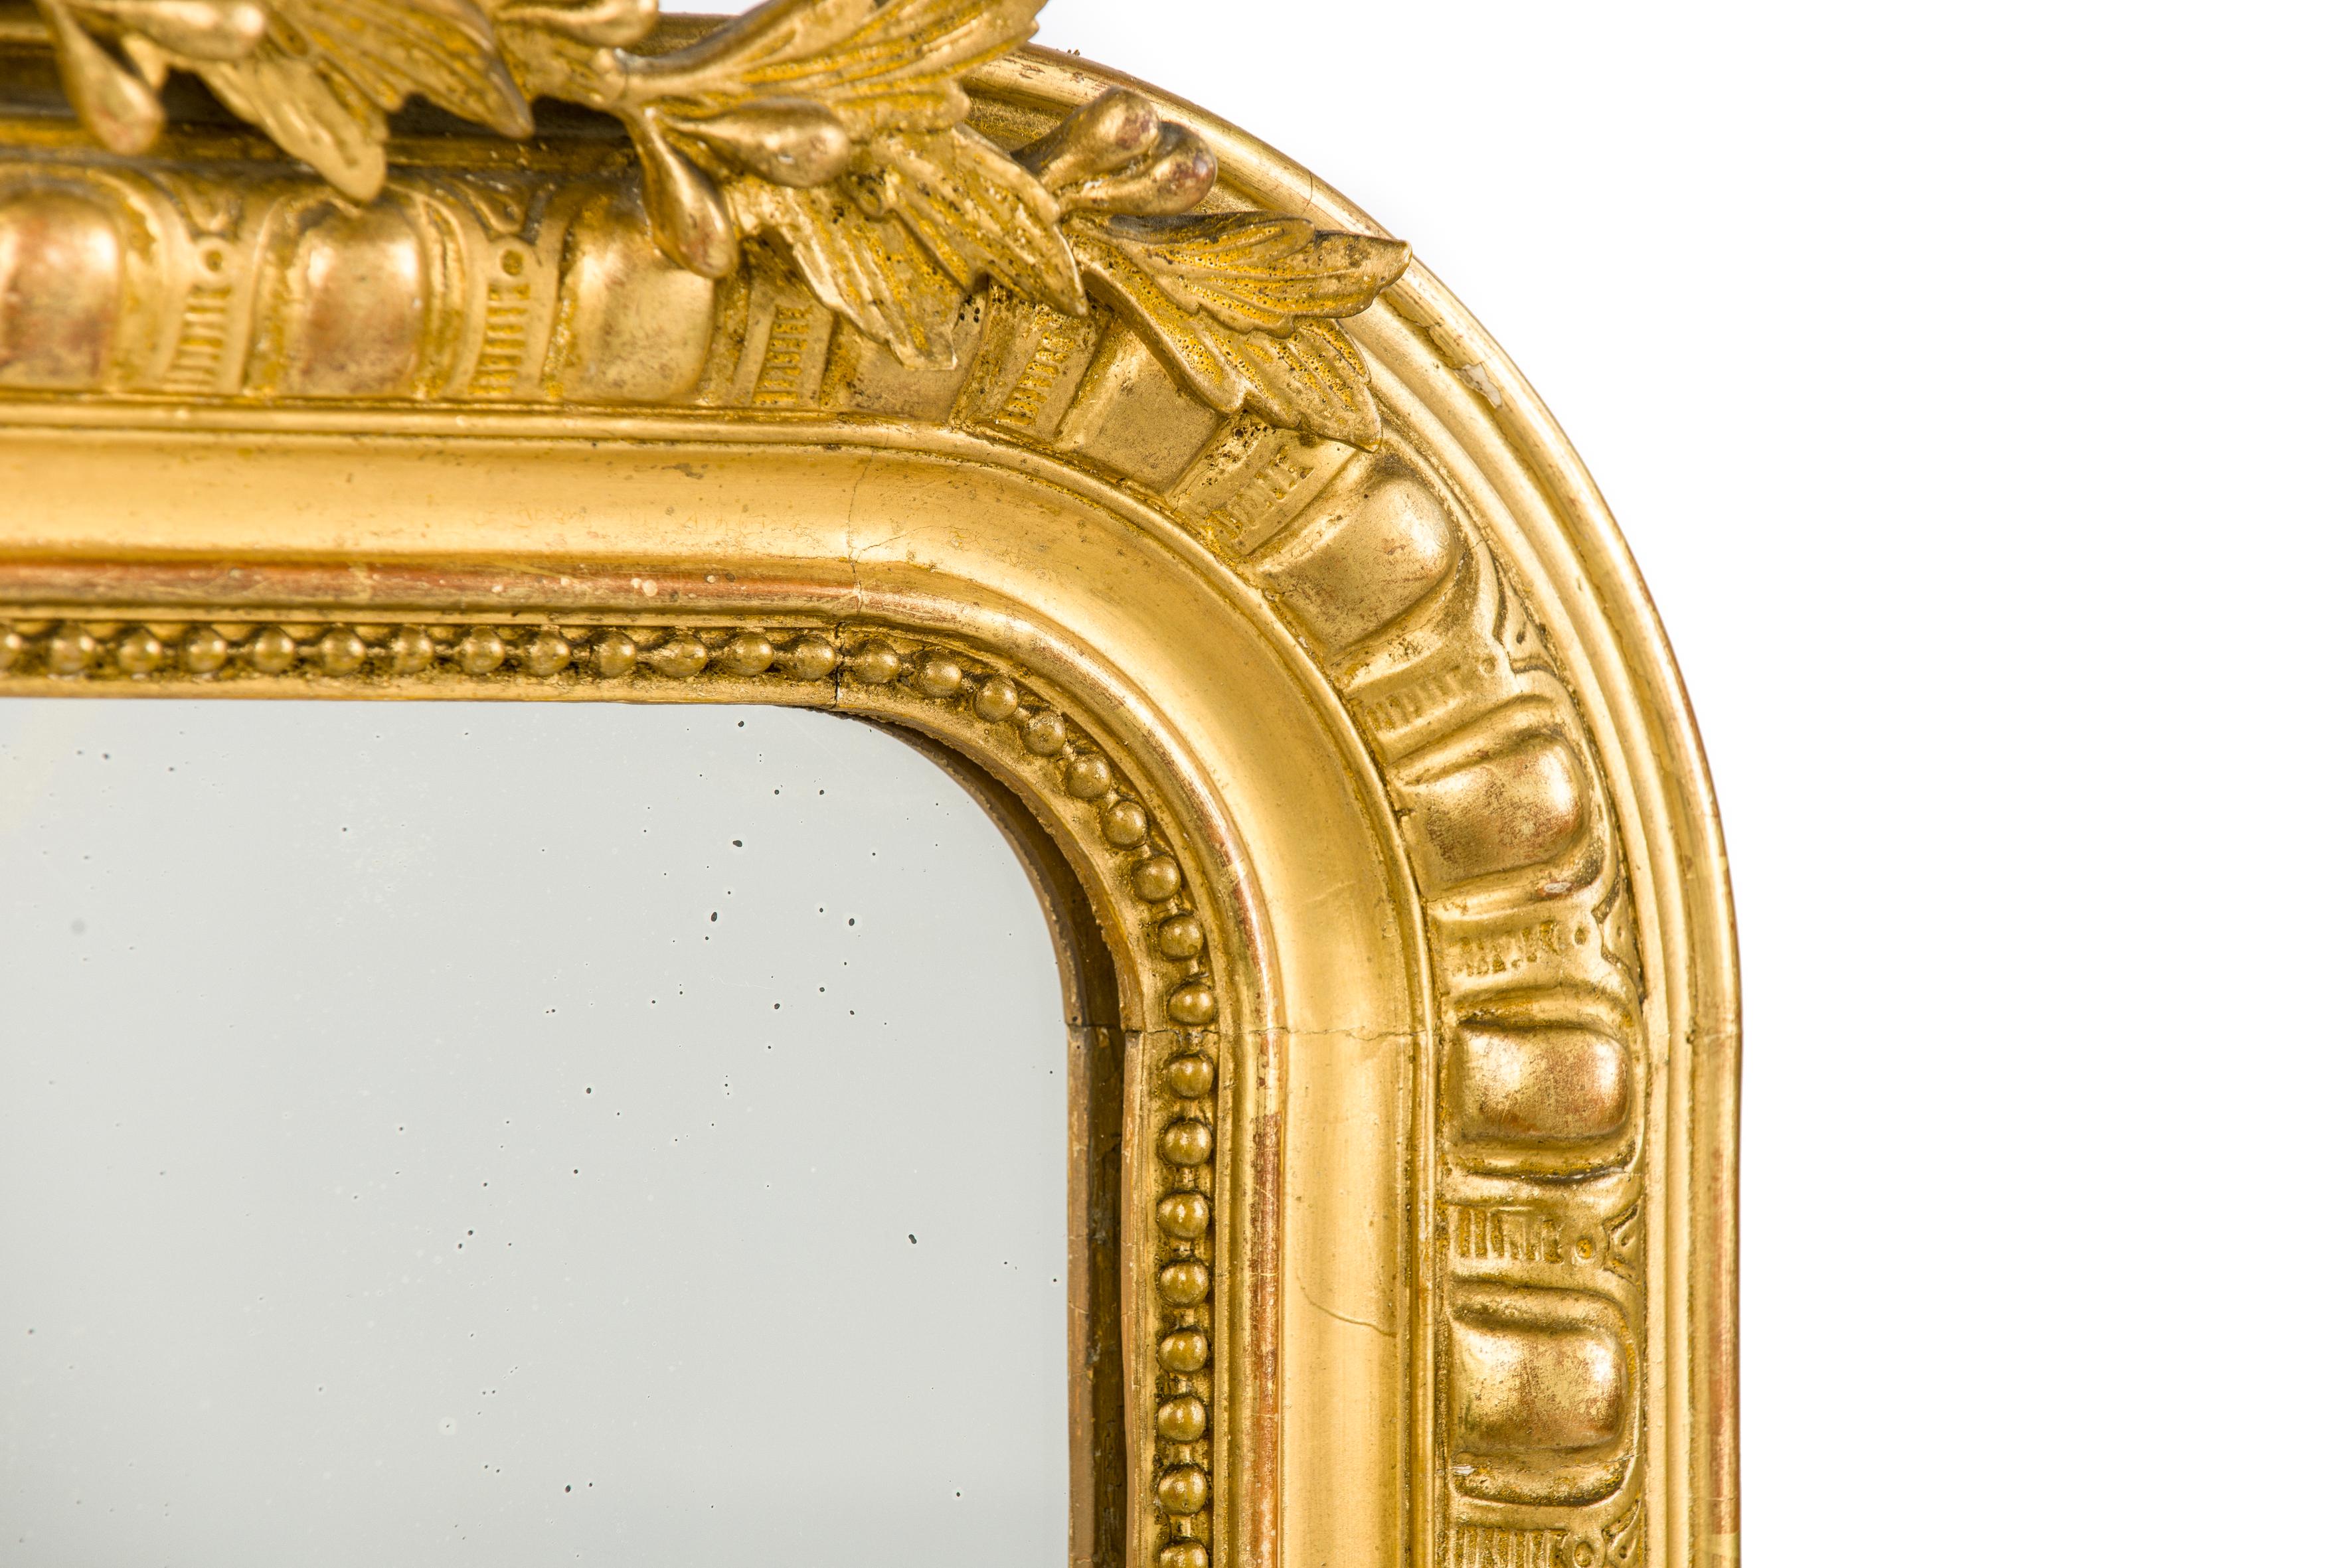 Polished Antique 19th-Century Gadrooned French Gold Leaf Gilt Louis Philippe Mirror For Sale